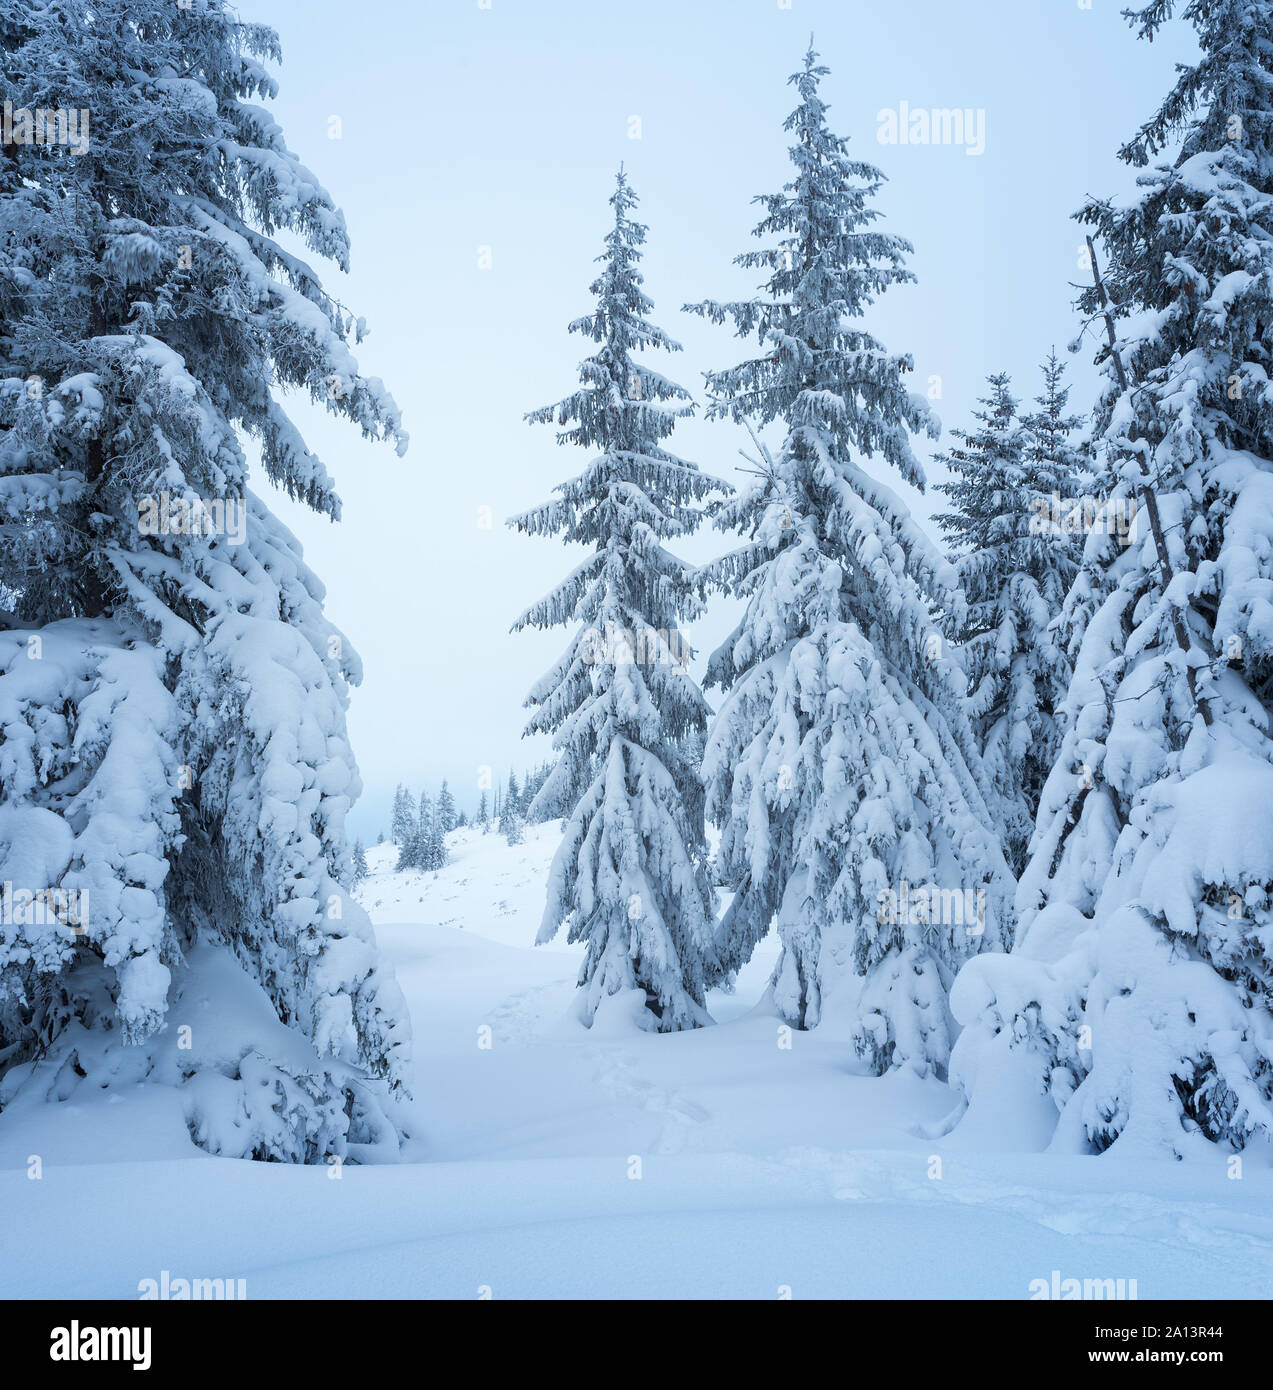 Winter forest. Christmas landscape with fir trees in the snow Stock Photo